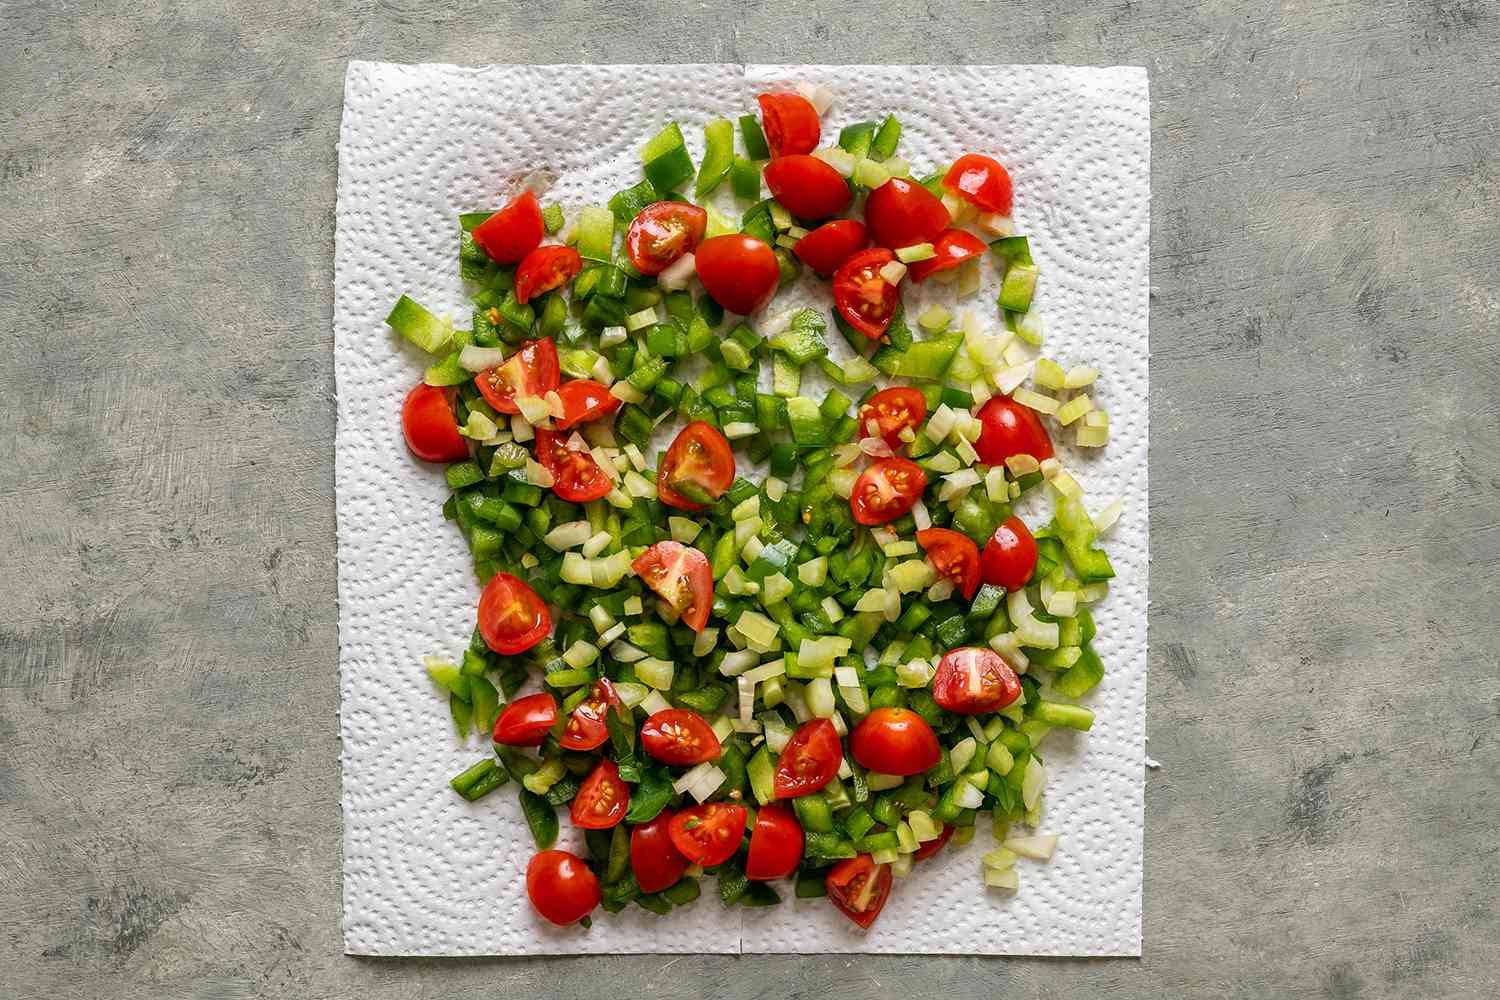 Bell pepper, celery, and cherry tomatoes on a paper towel 